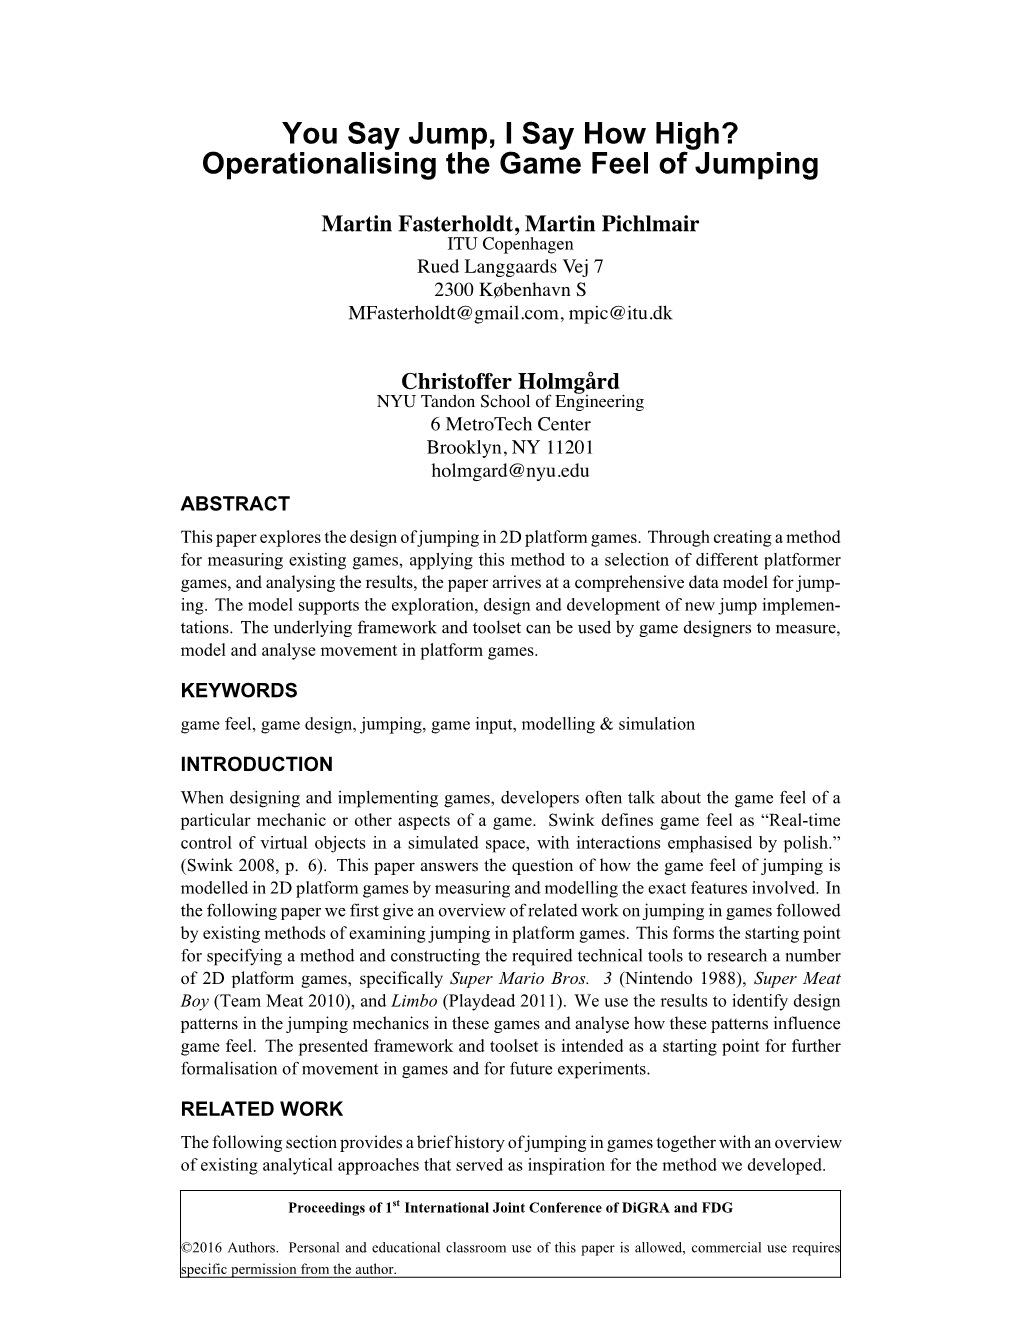 You Say Jump, I Say How High? Operationalising the Game Feel of Jumping